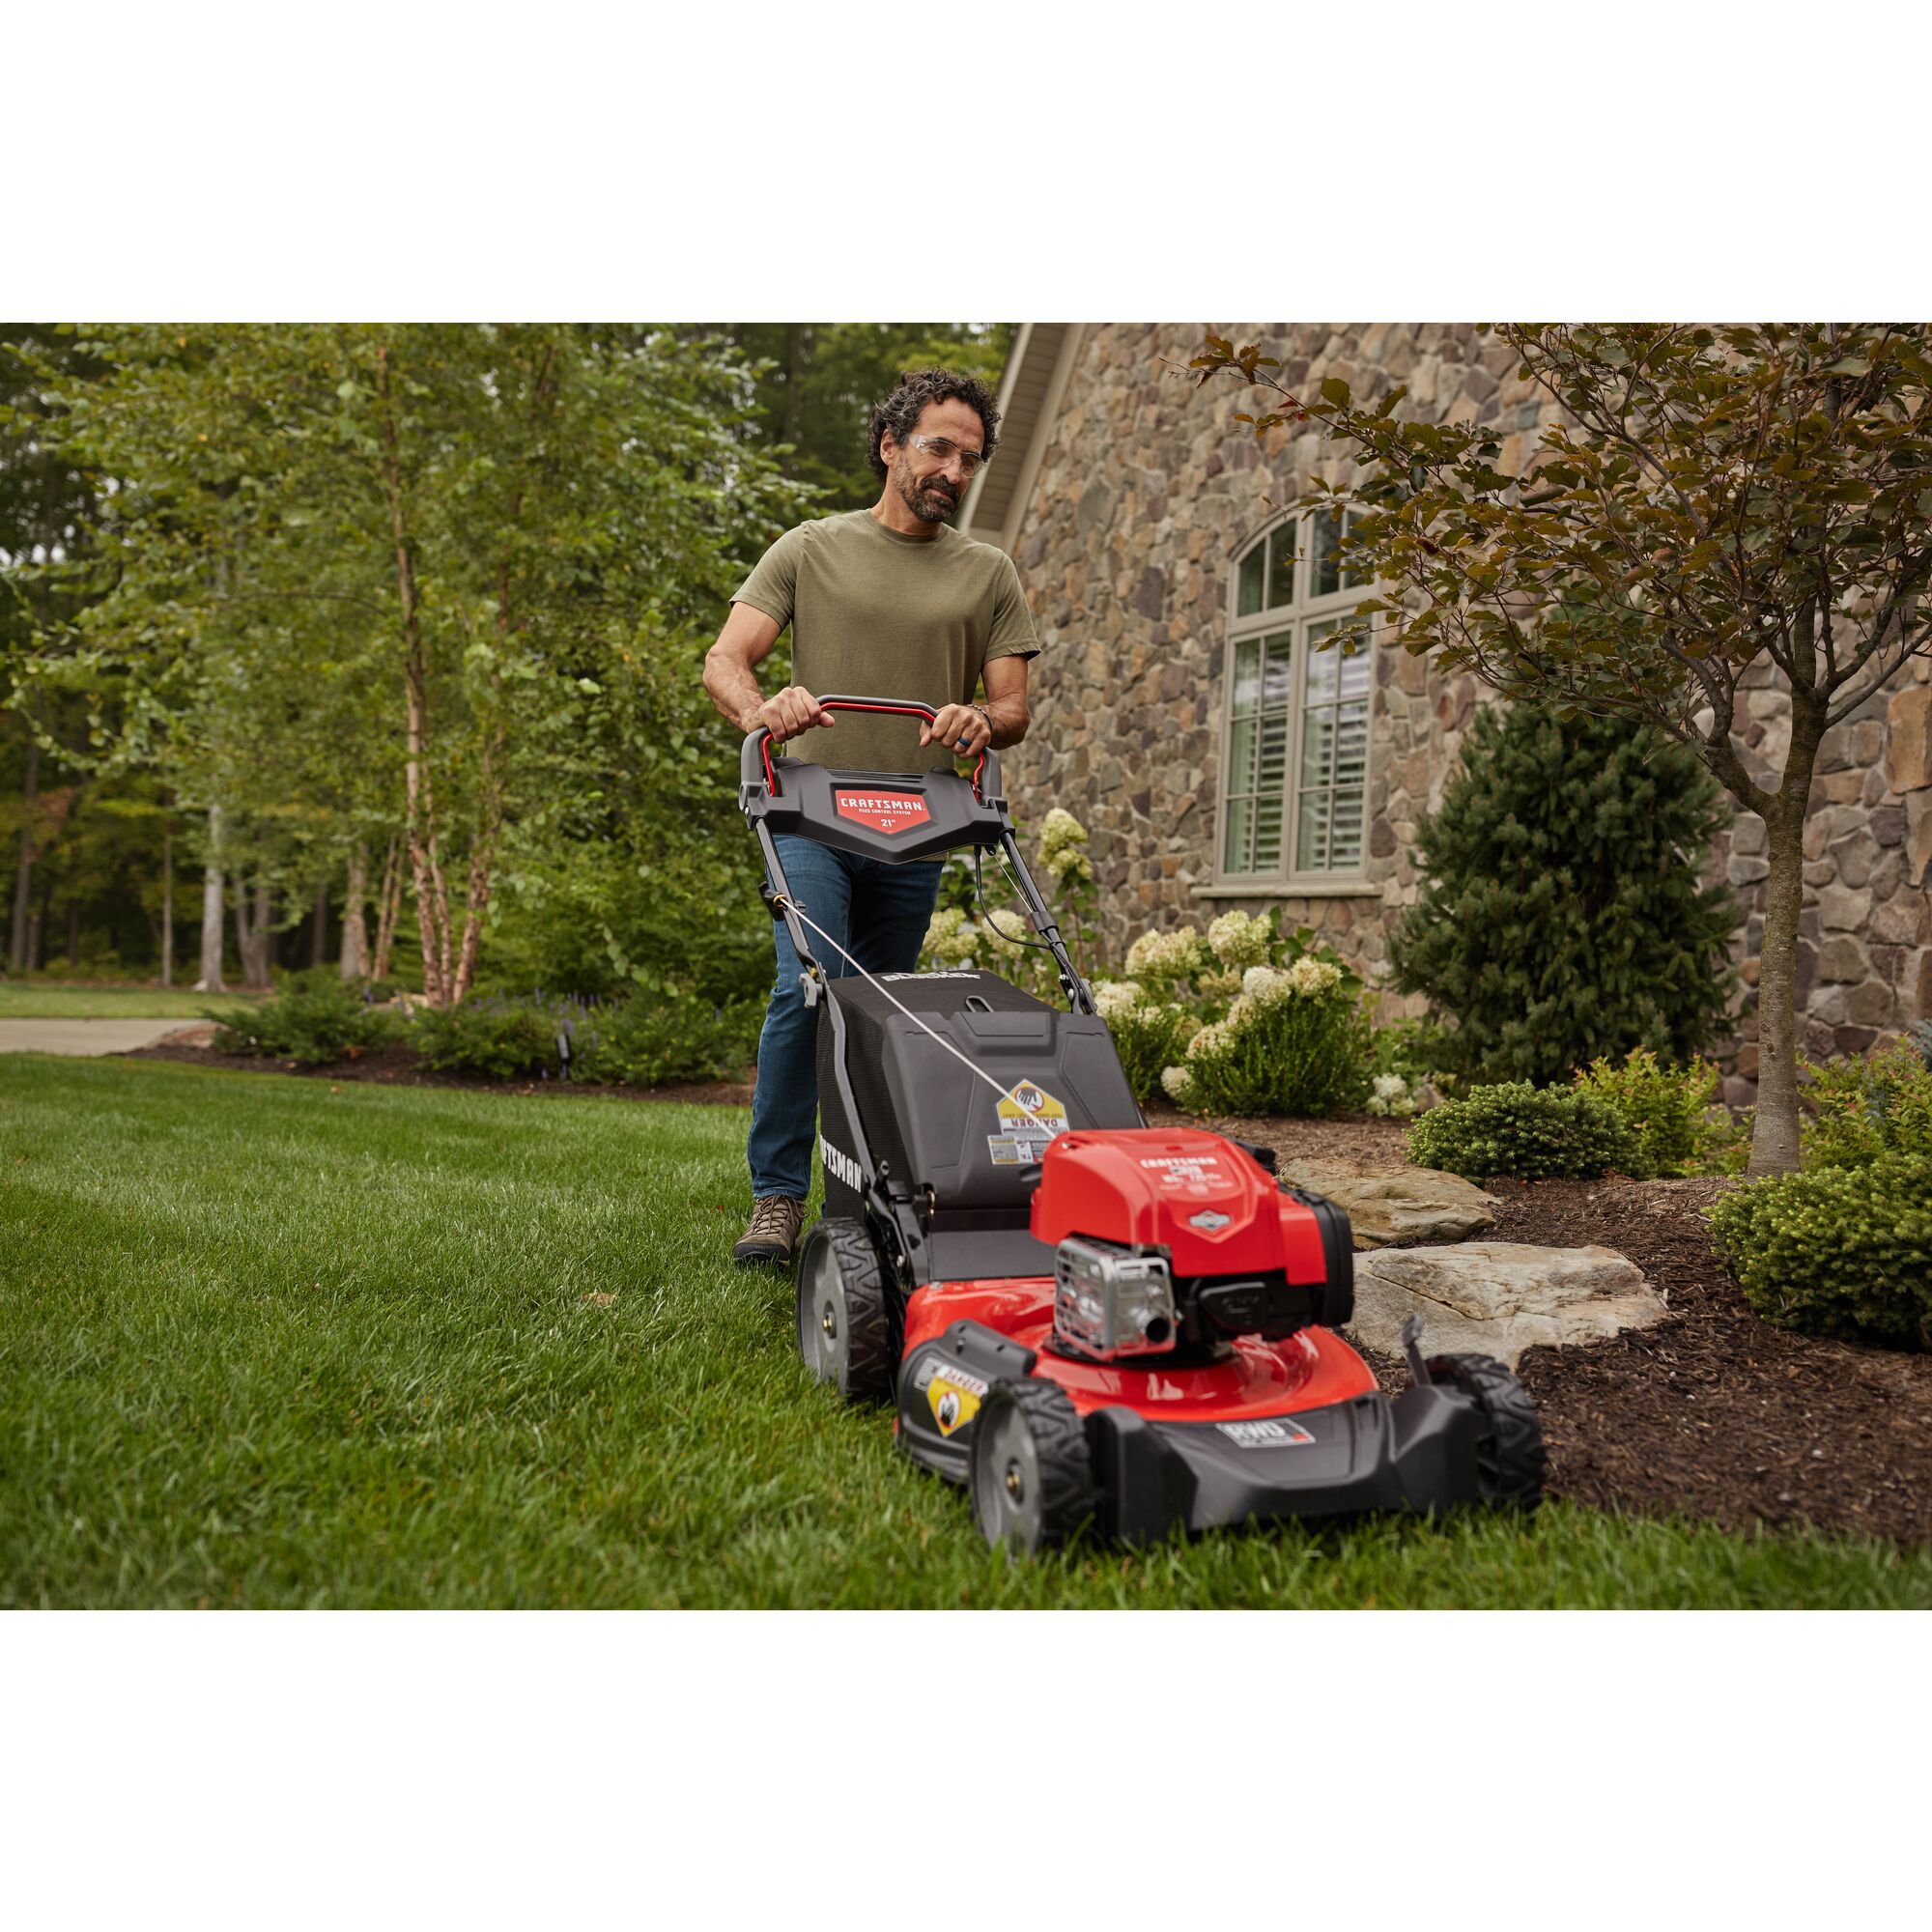 CRAFTSMAN M320 RWD Self-Propelled Mower mowing a well-groomed lawn in front view in green shirt and jeans